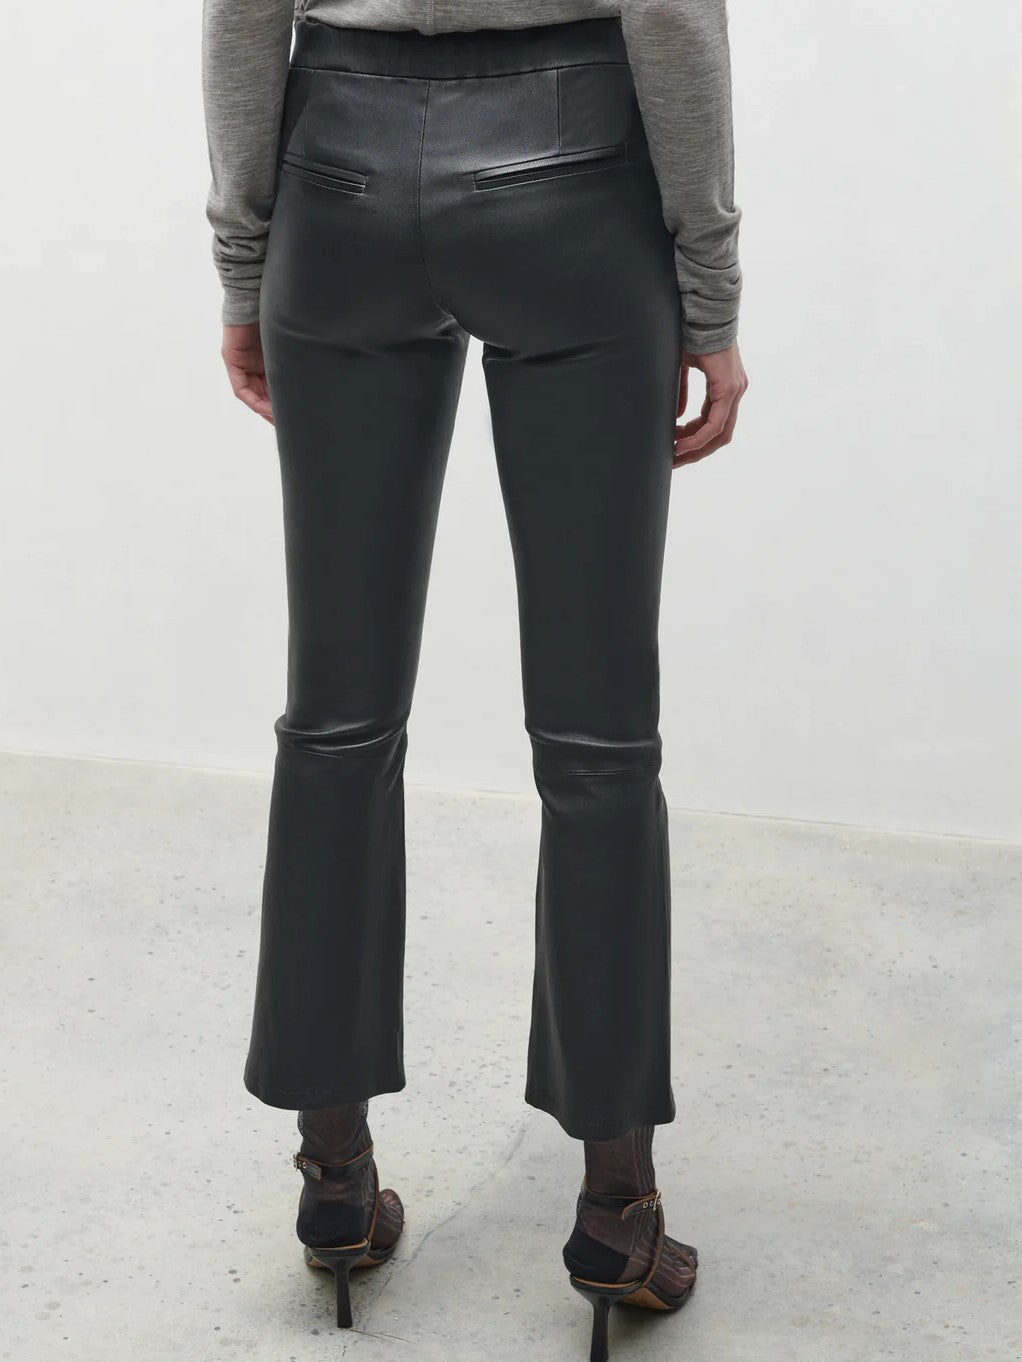 Livley Leather Pants Skinny Flared